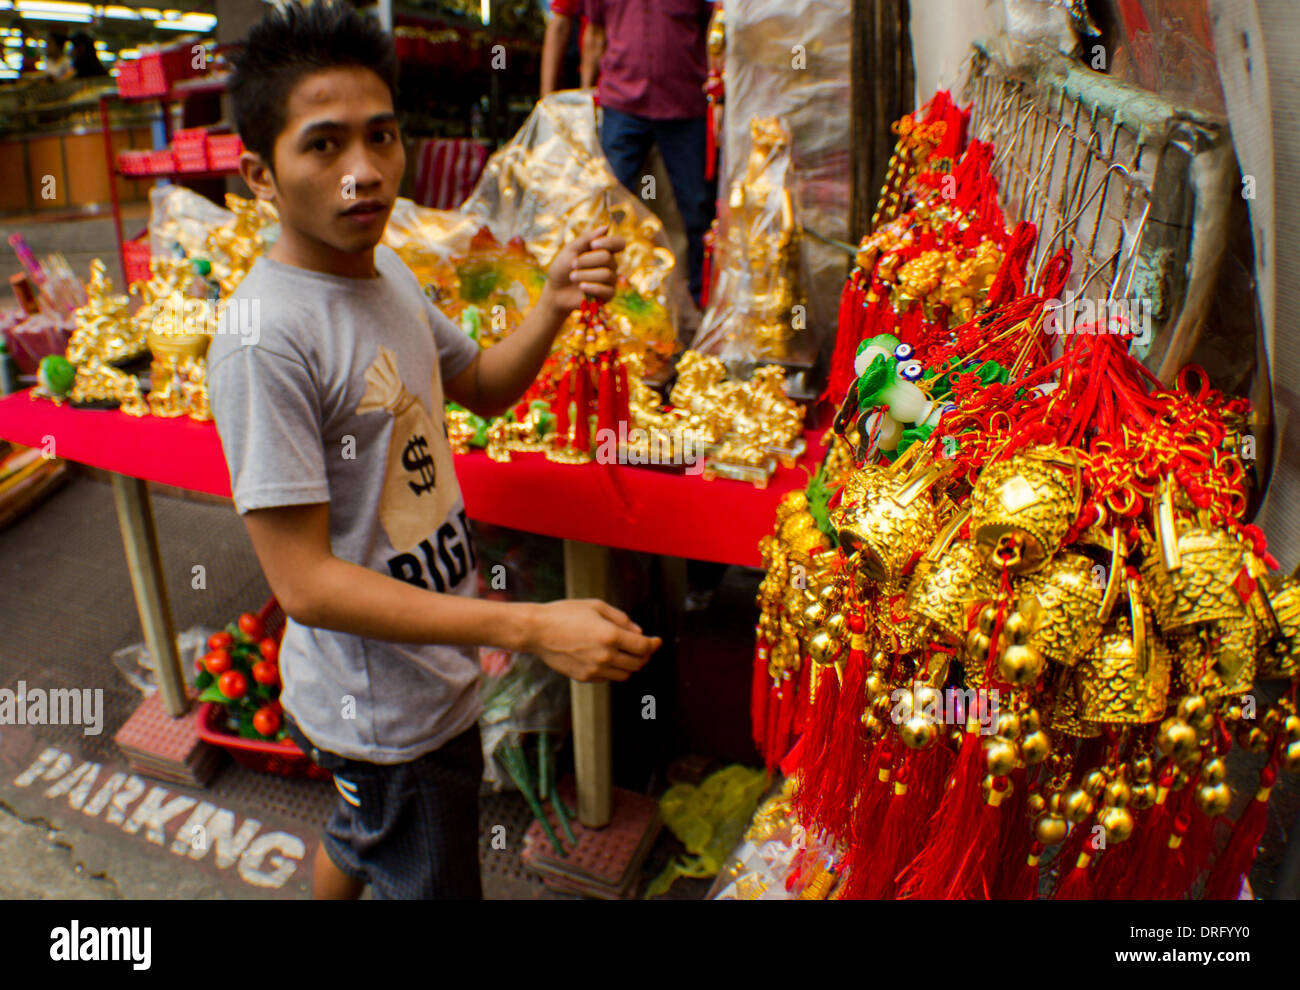 Metro Manila, Philippines-January 25, 2014: Street vendor preparing his display of lucky charms. A week before the annual celebration the Filipino-Chinese community prepares to welcome the Lunar New Year in Manila's Chinatown district, Binondo. Chinatown in Manila, considered to be the world’s oldest Chinatowns outside China. Credit:  Herman Lumanog/Alamy Live News Stock Photo